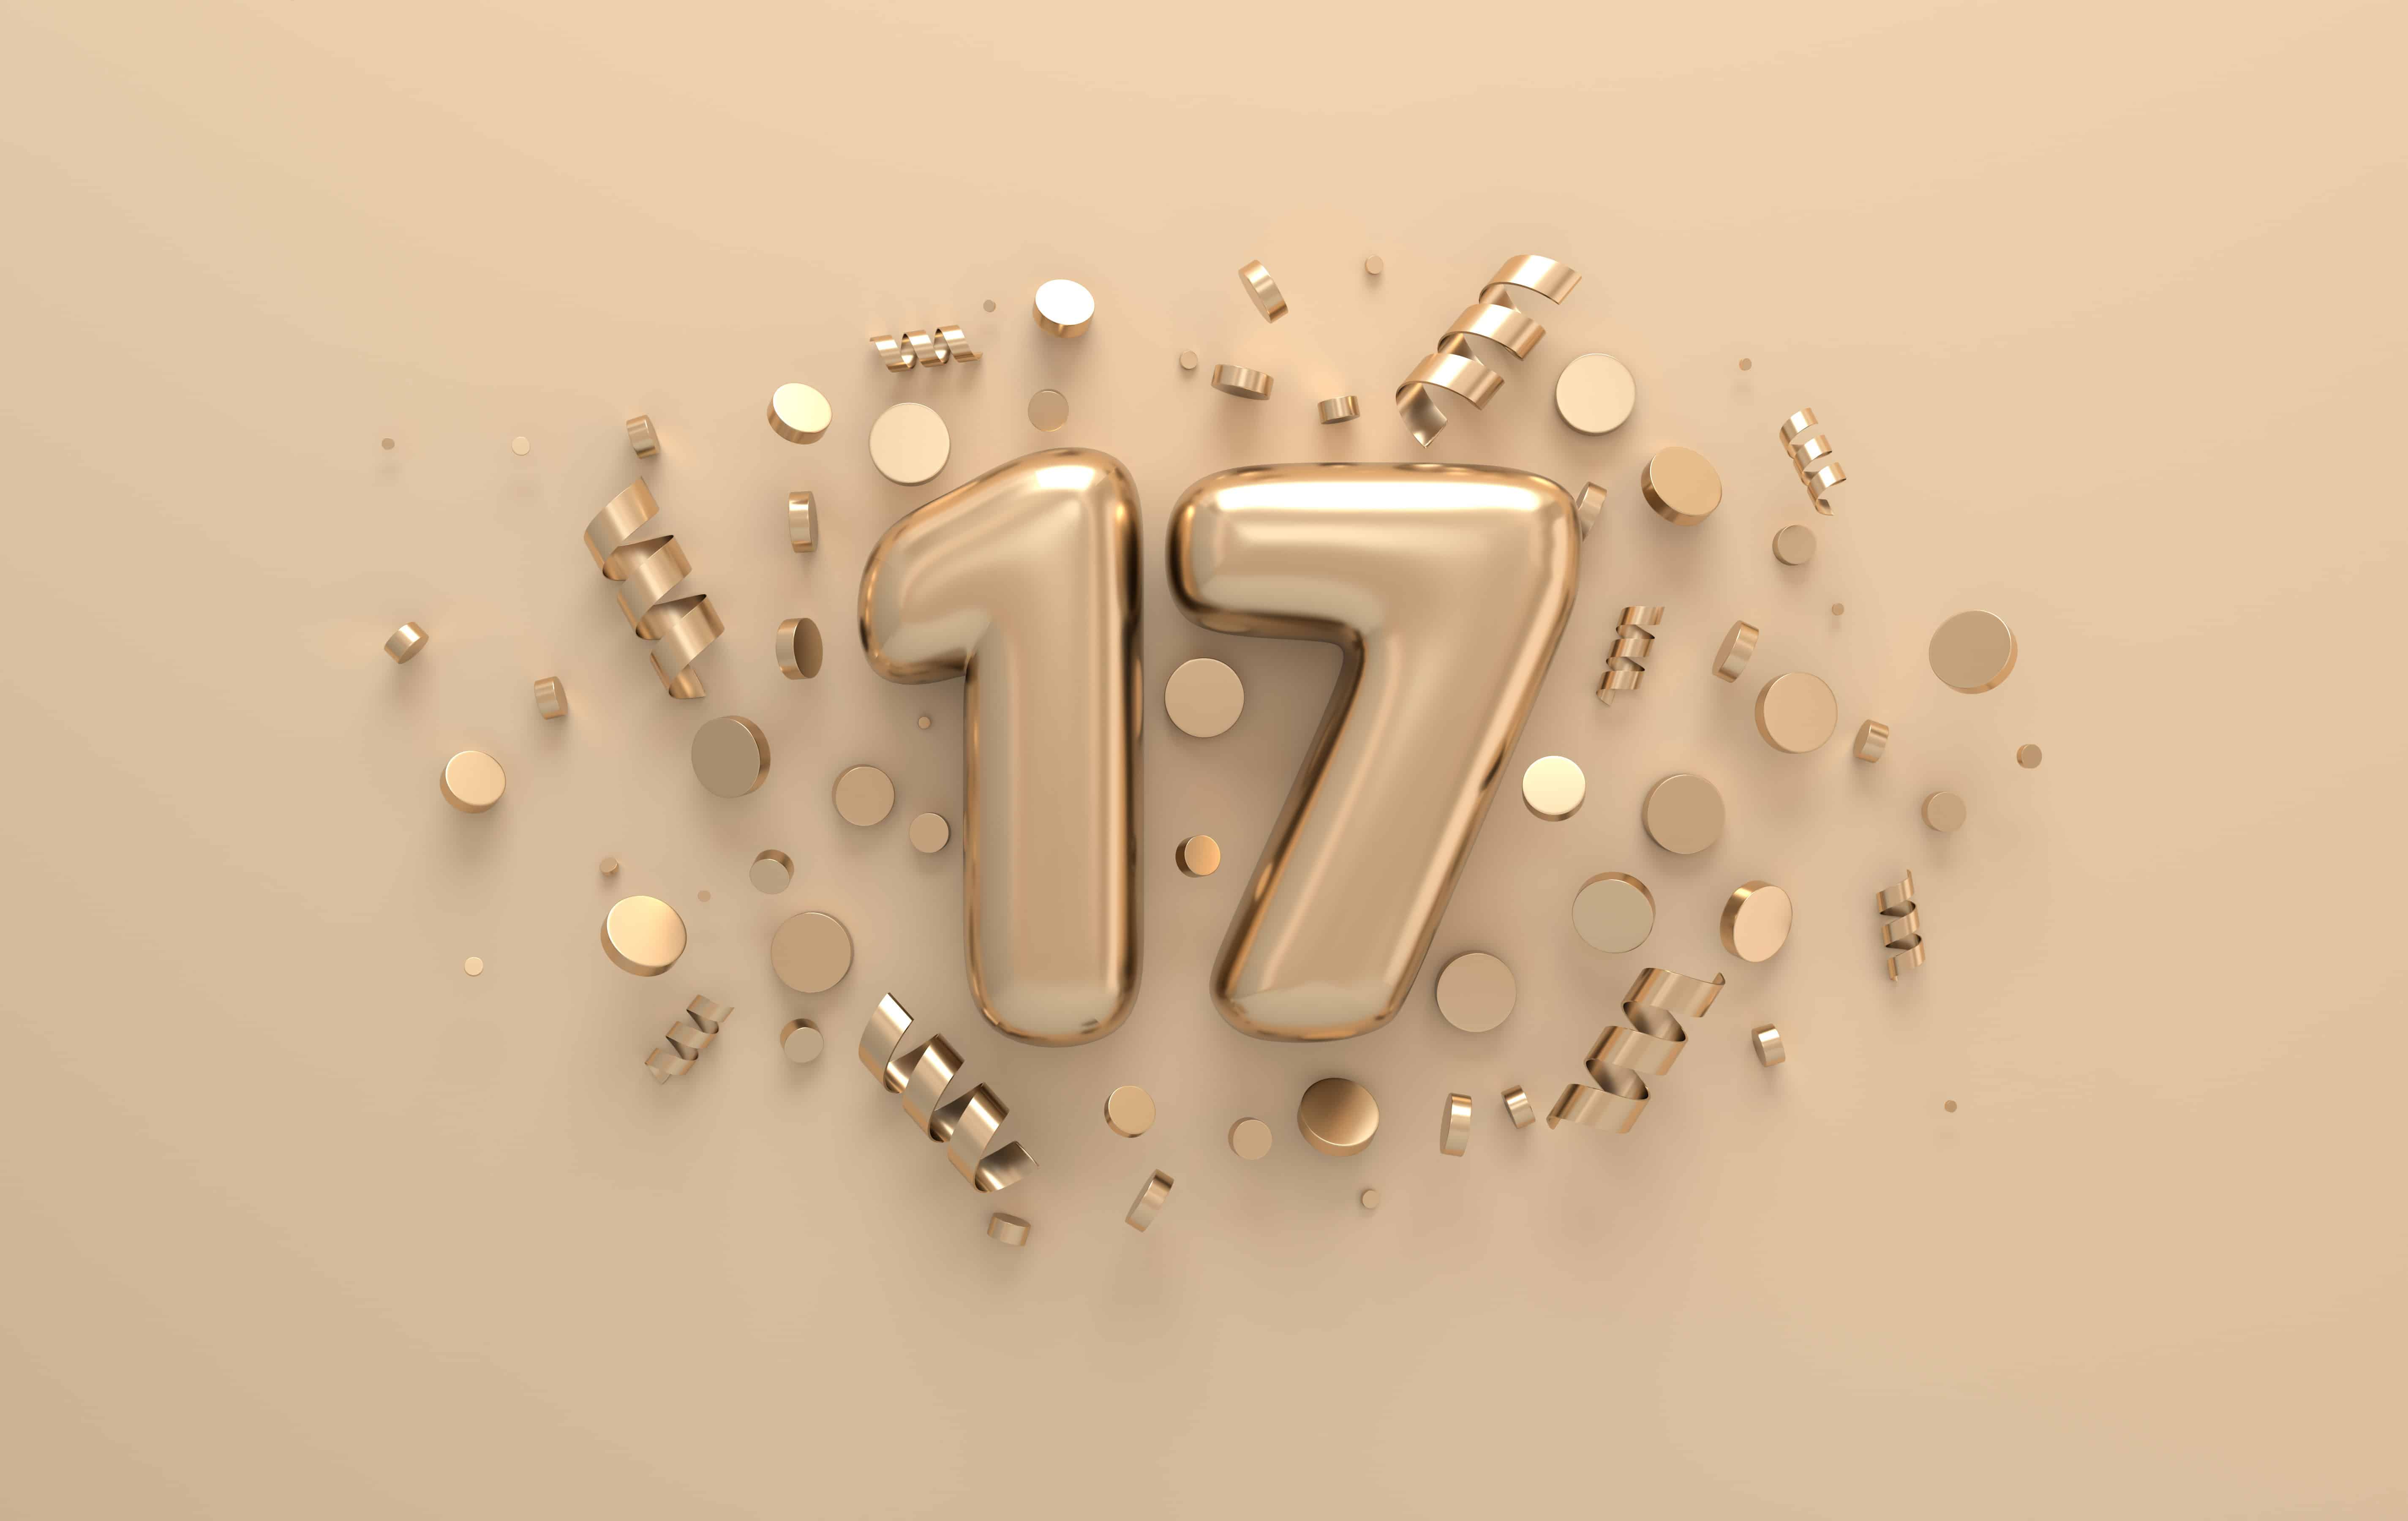 Seventeen Cool Facts About The Number 17 - Facts.net